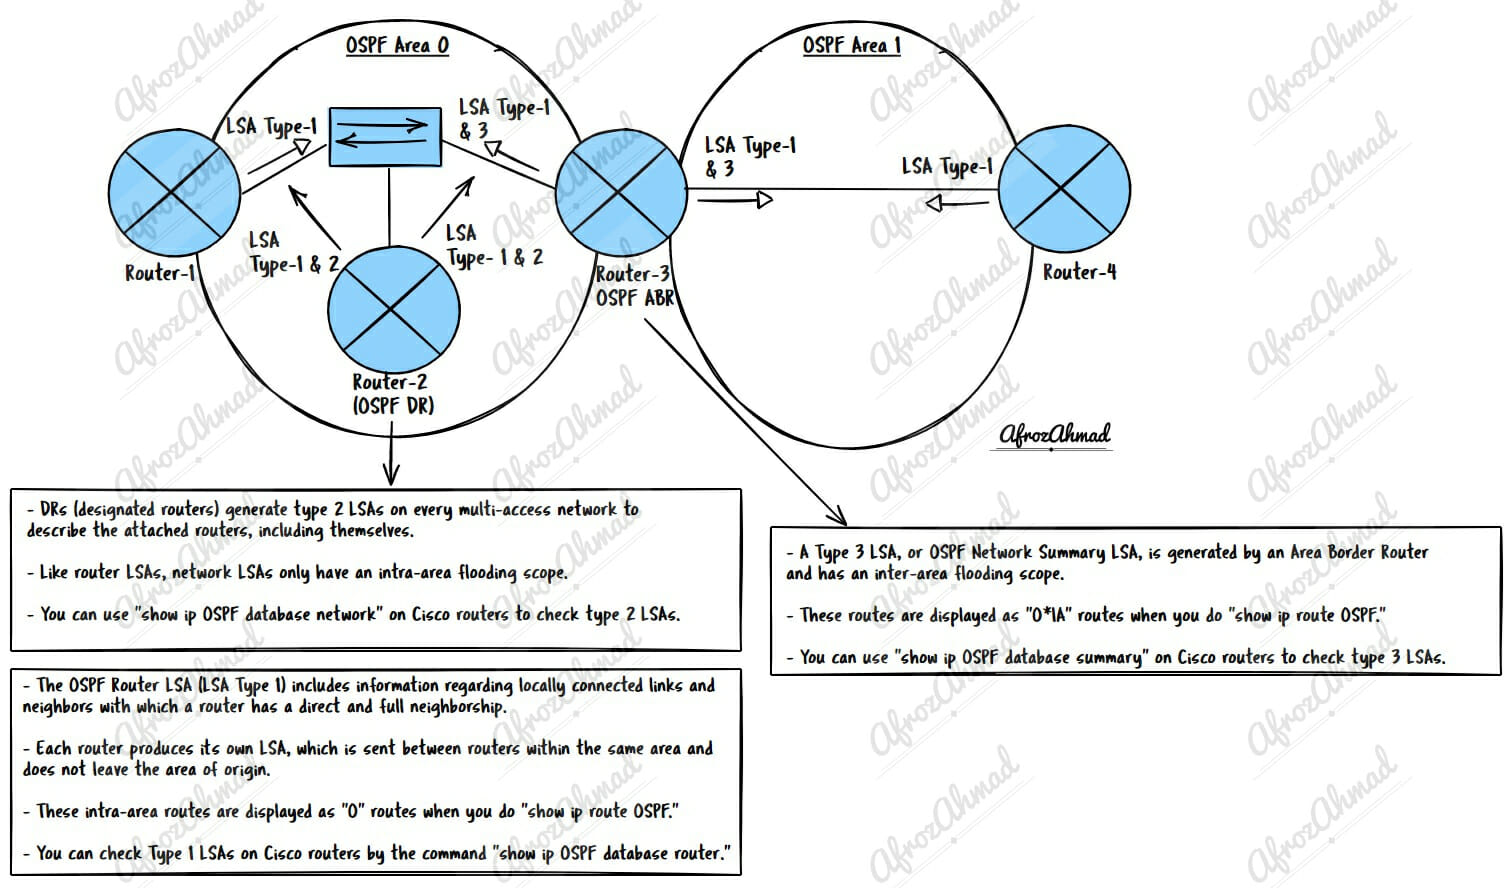 OSPF LSA Types 1, 2 and 3